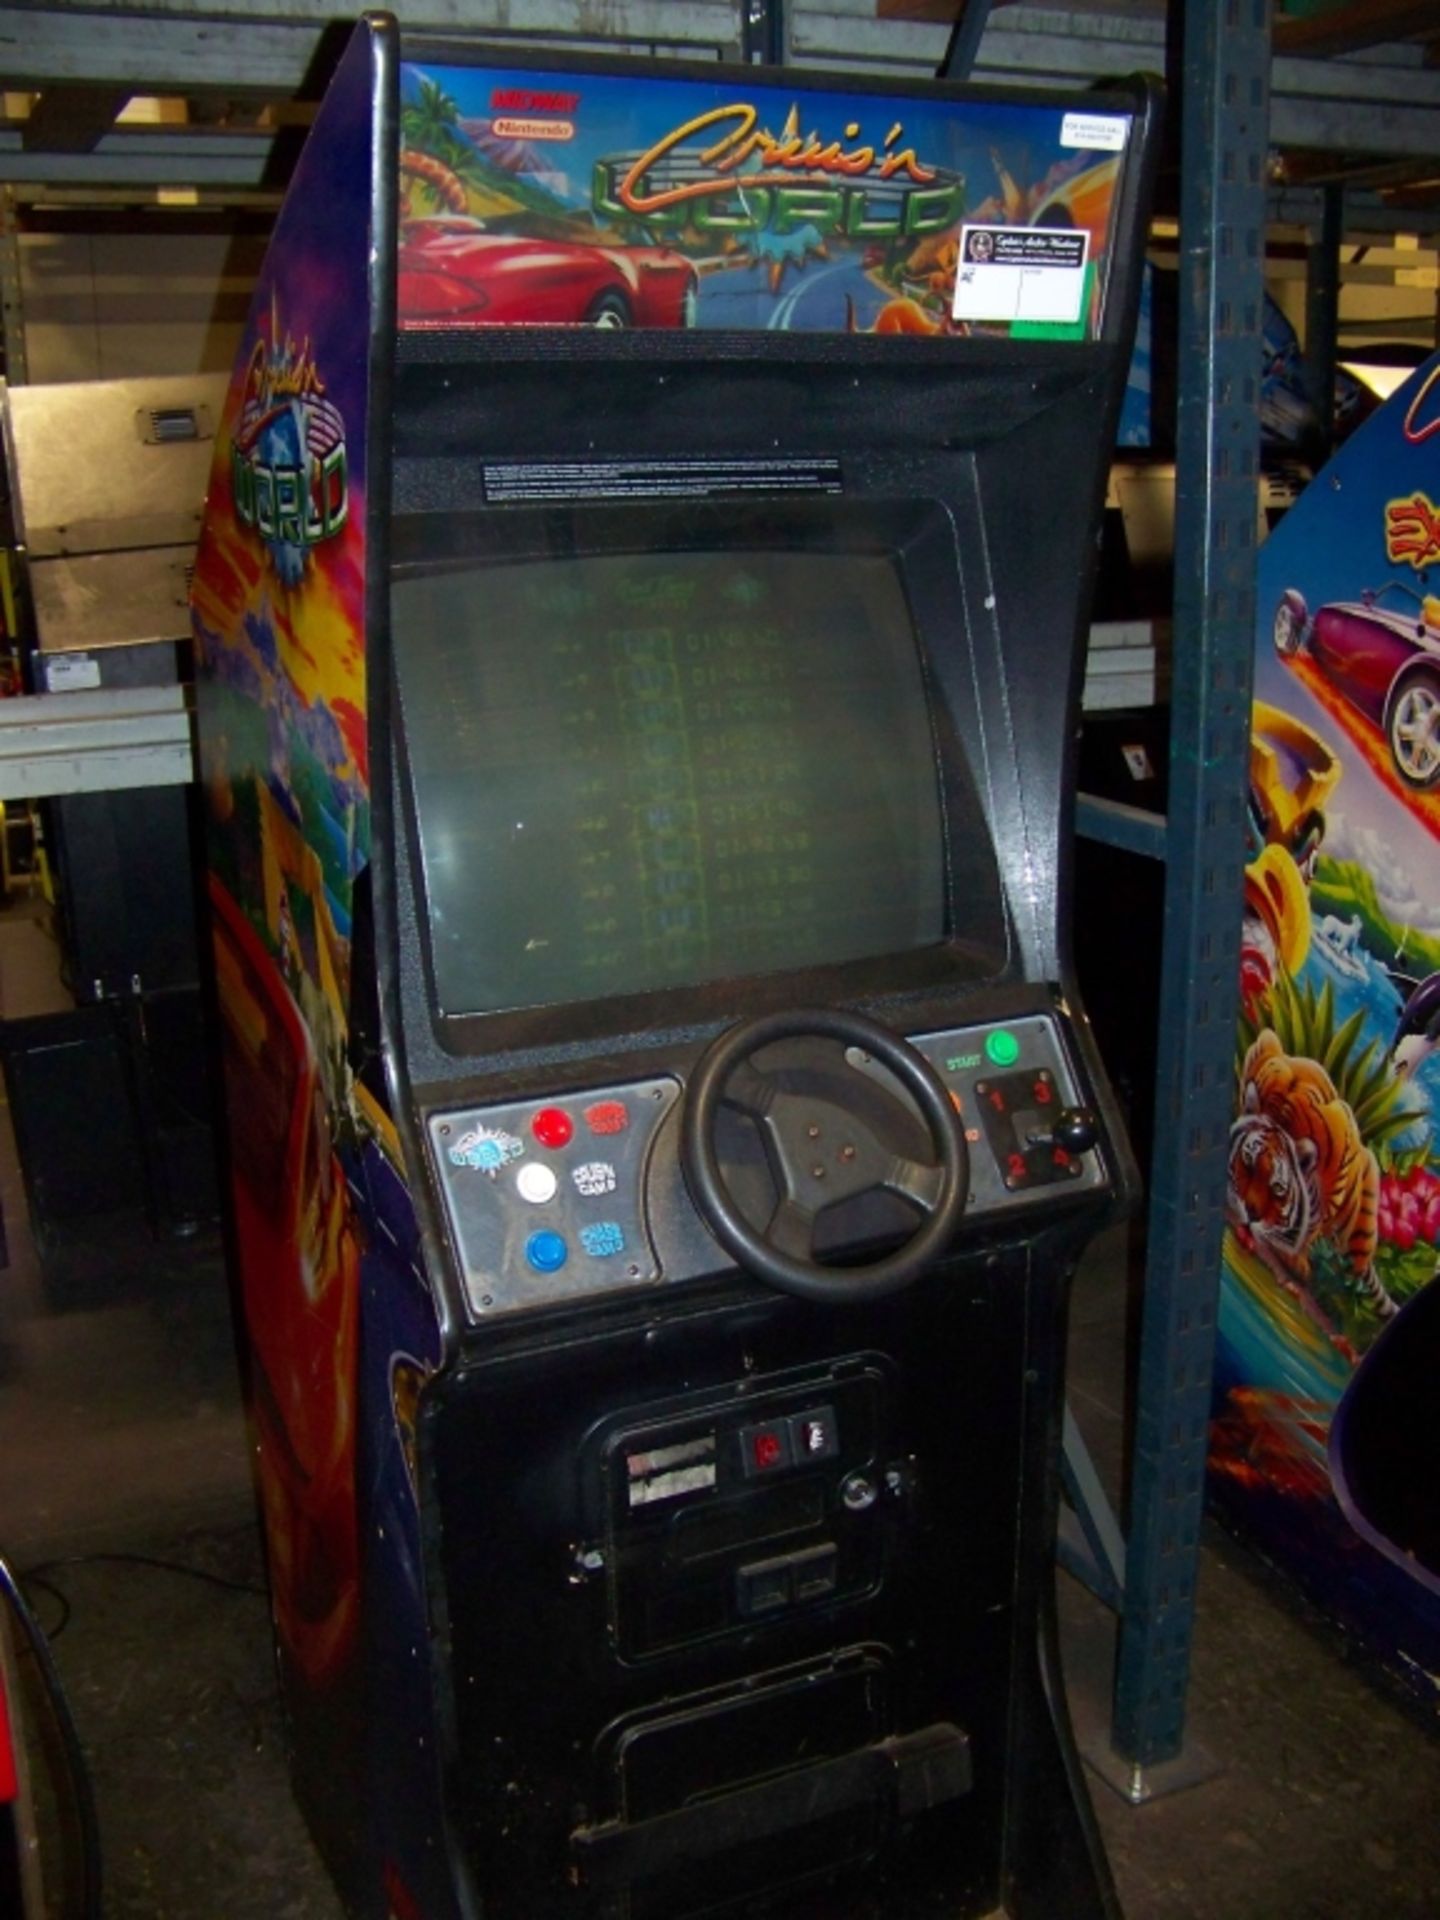 CRUISIN WORLD UPRIGHT RACING ARCADE GAME MIDWAY - Image 3 of 3